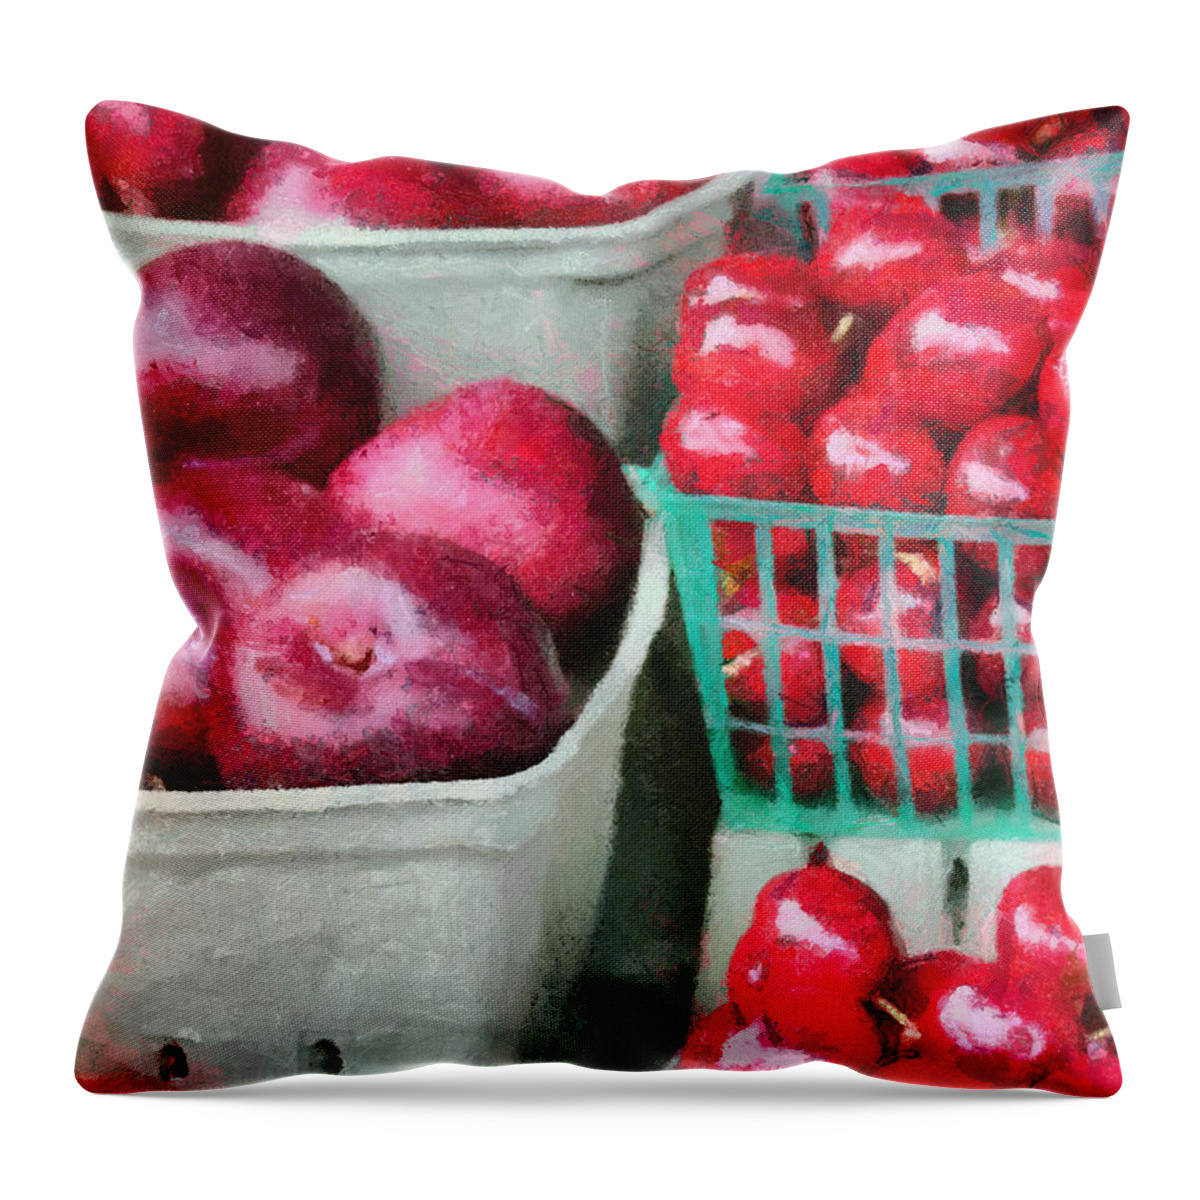 Apple Throw Pillow featuring the painting Fresh Market Fruit by Jeffrey Kolker